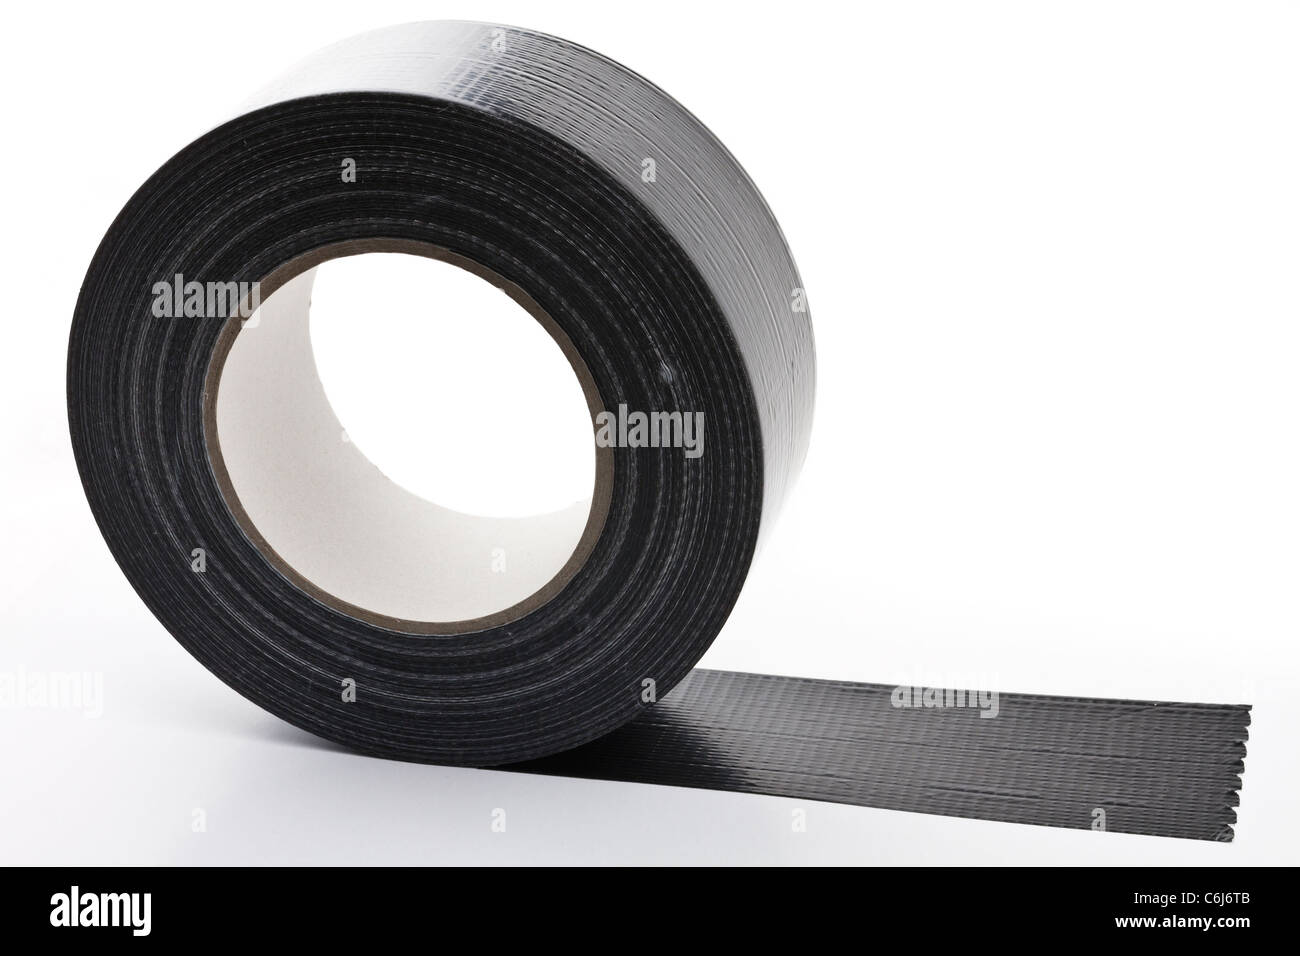 black adhesive tape on light background. partly unroled Stock Photo